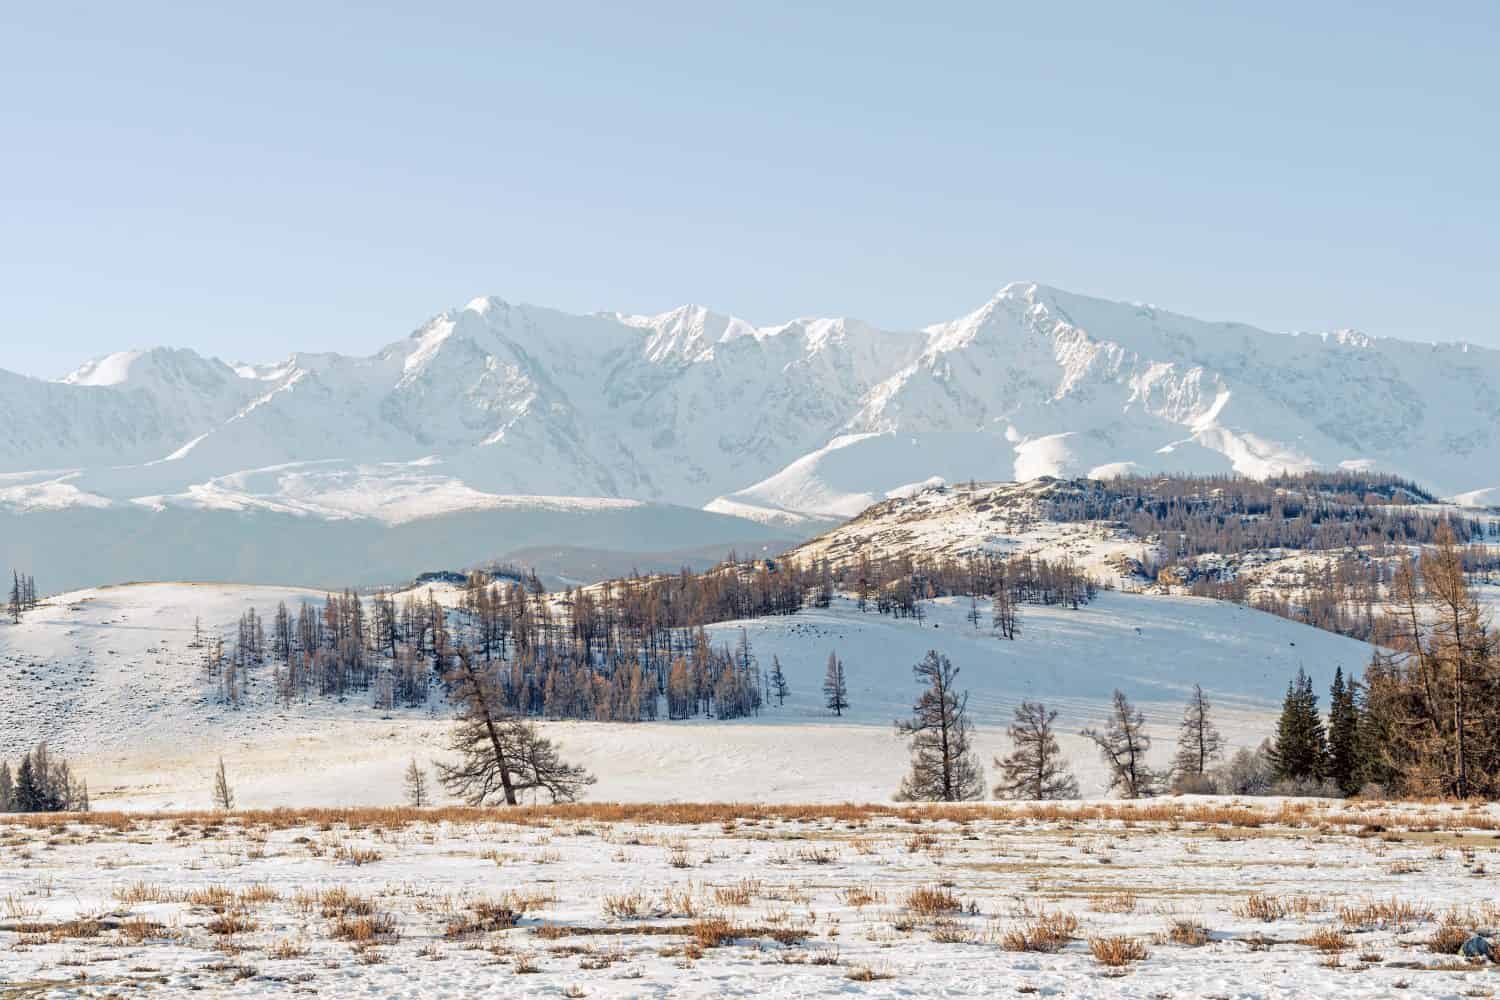 beautiful snowy landscape with mountains in the background. Steppe landscape of the Altai mountains or Mongolia. Severe frost.